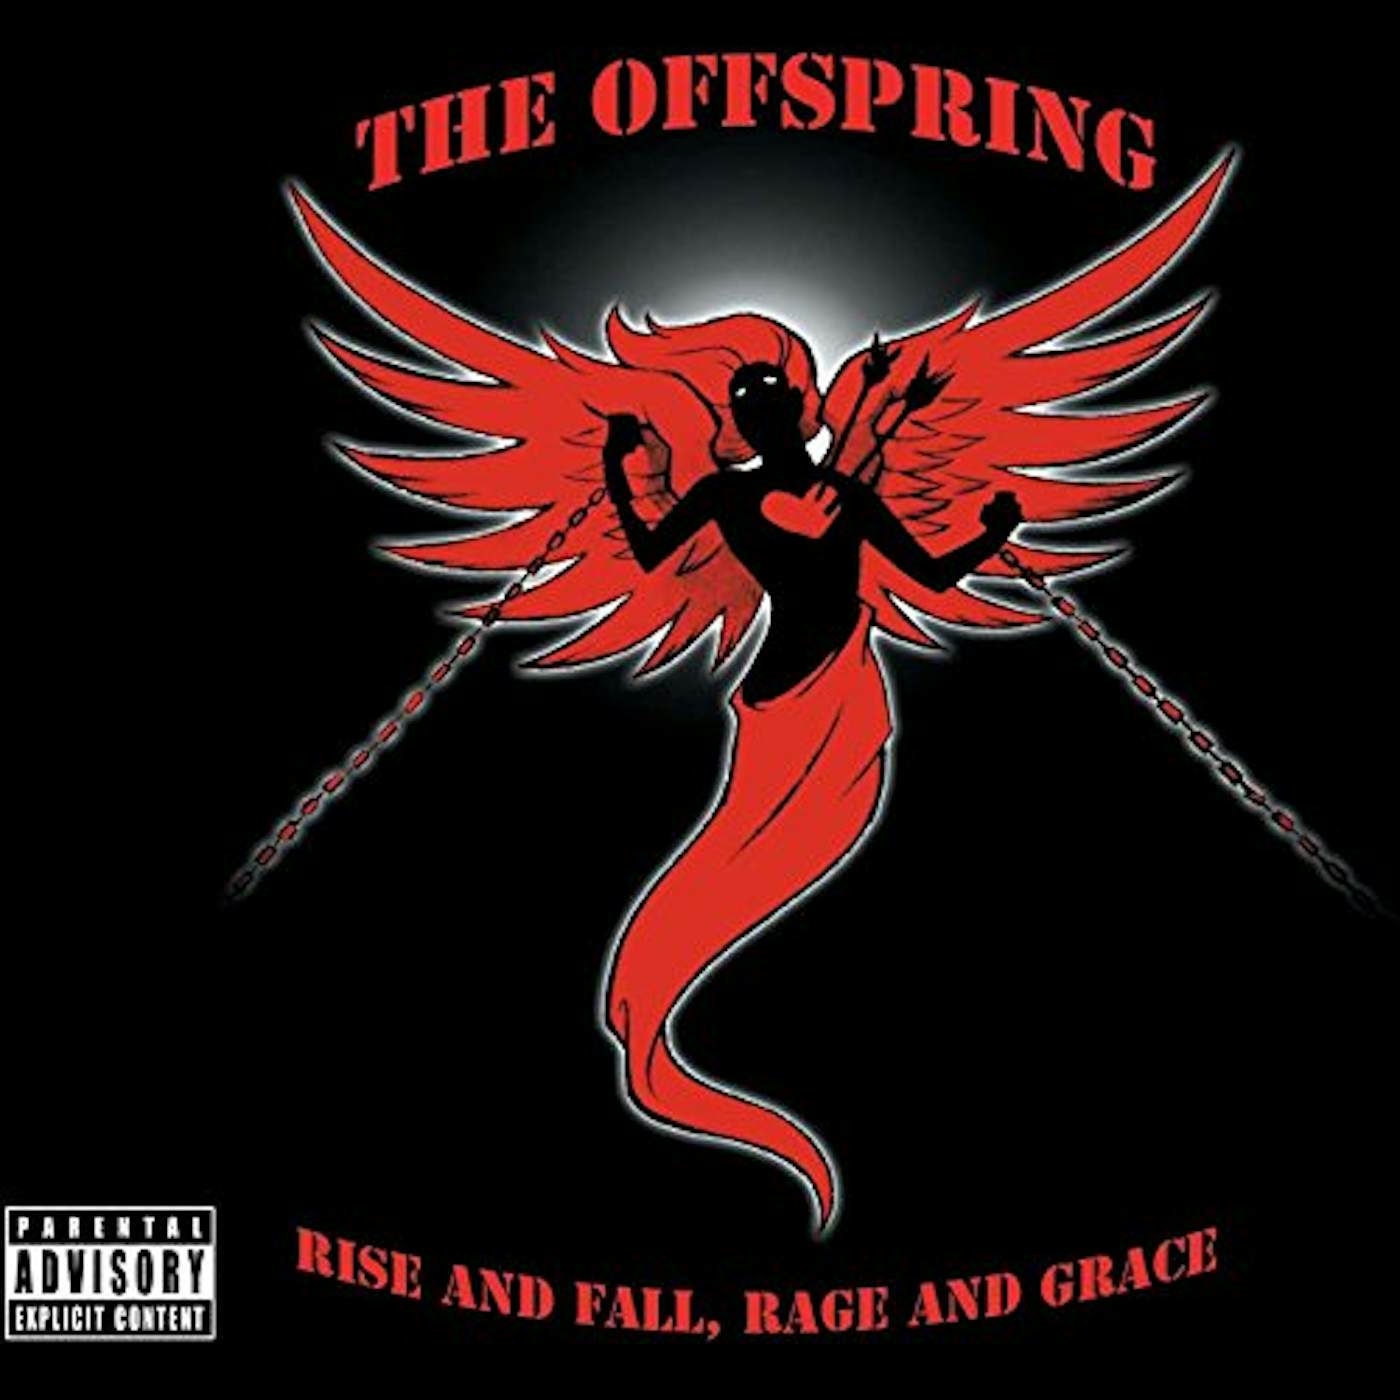 The Offspring RISE & FALL RAGE & GRACE CD